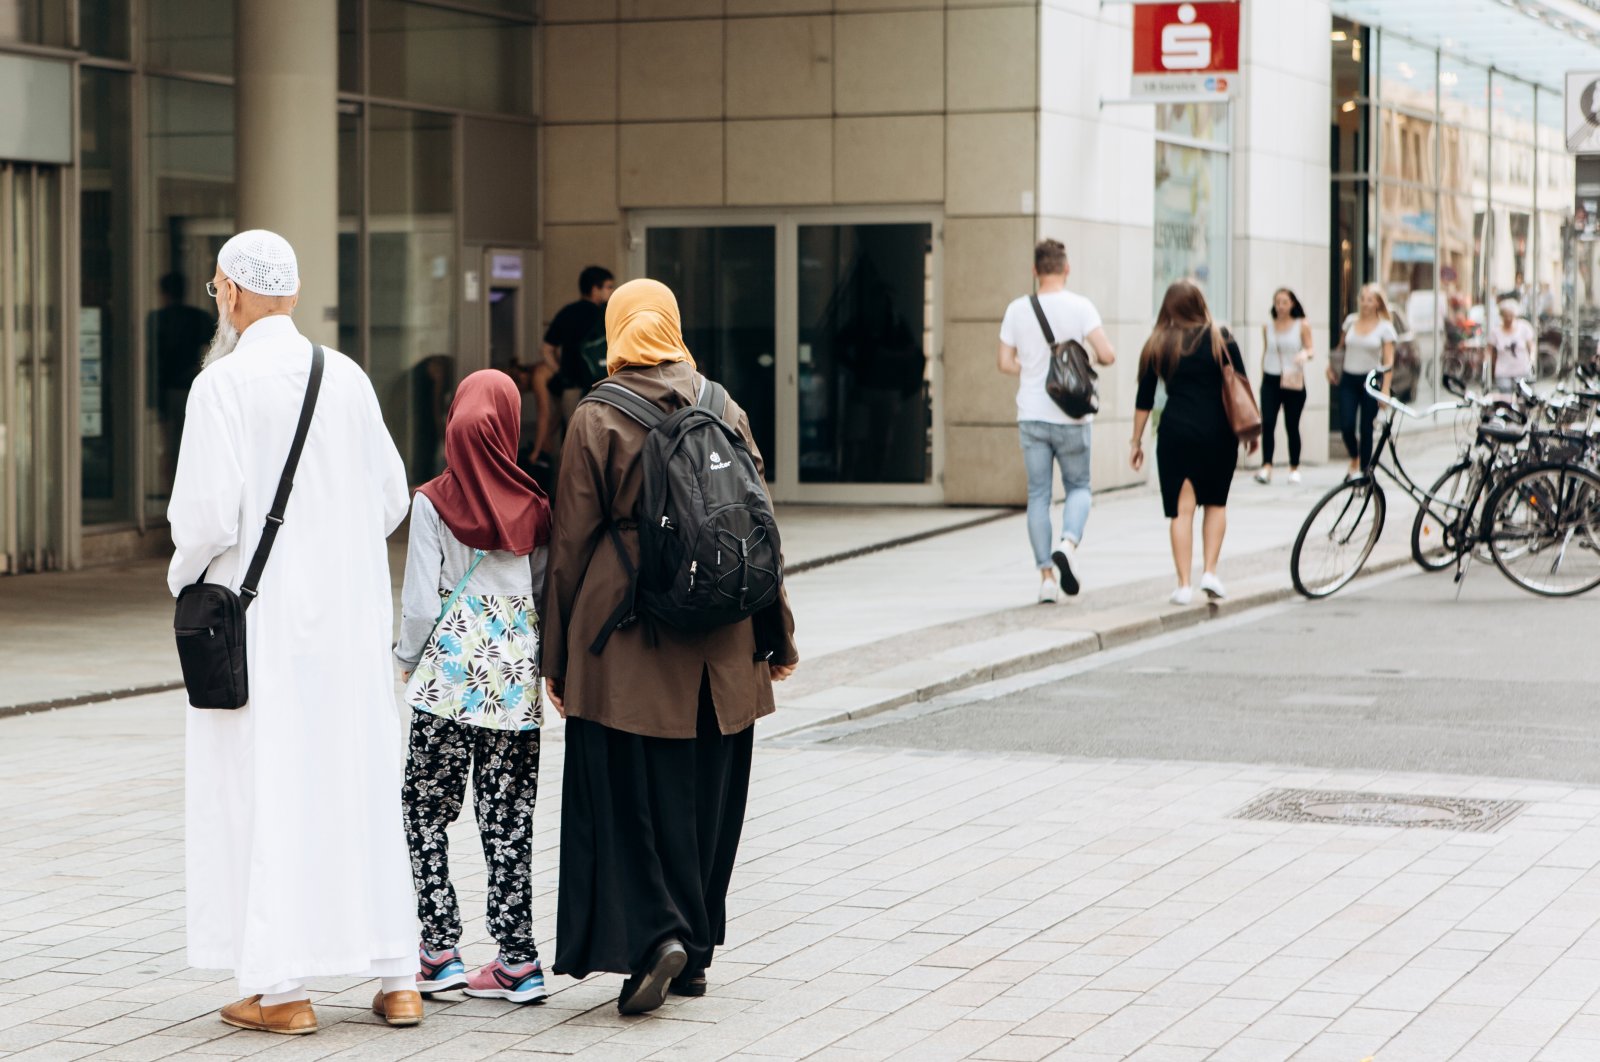 A family of tourists or migrants walking along the street in Leipzig, Germany, Sept. 6, 2018. (Shutterstock File Photo)